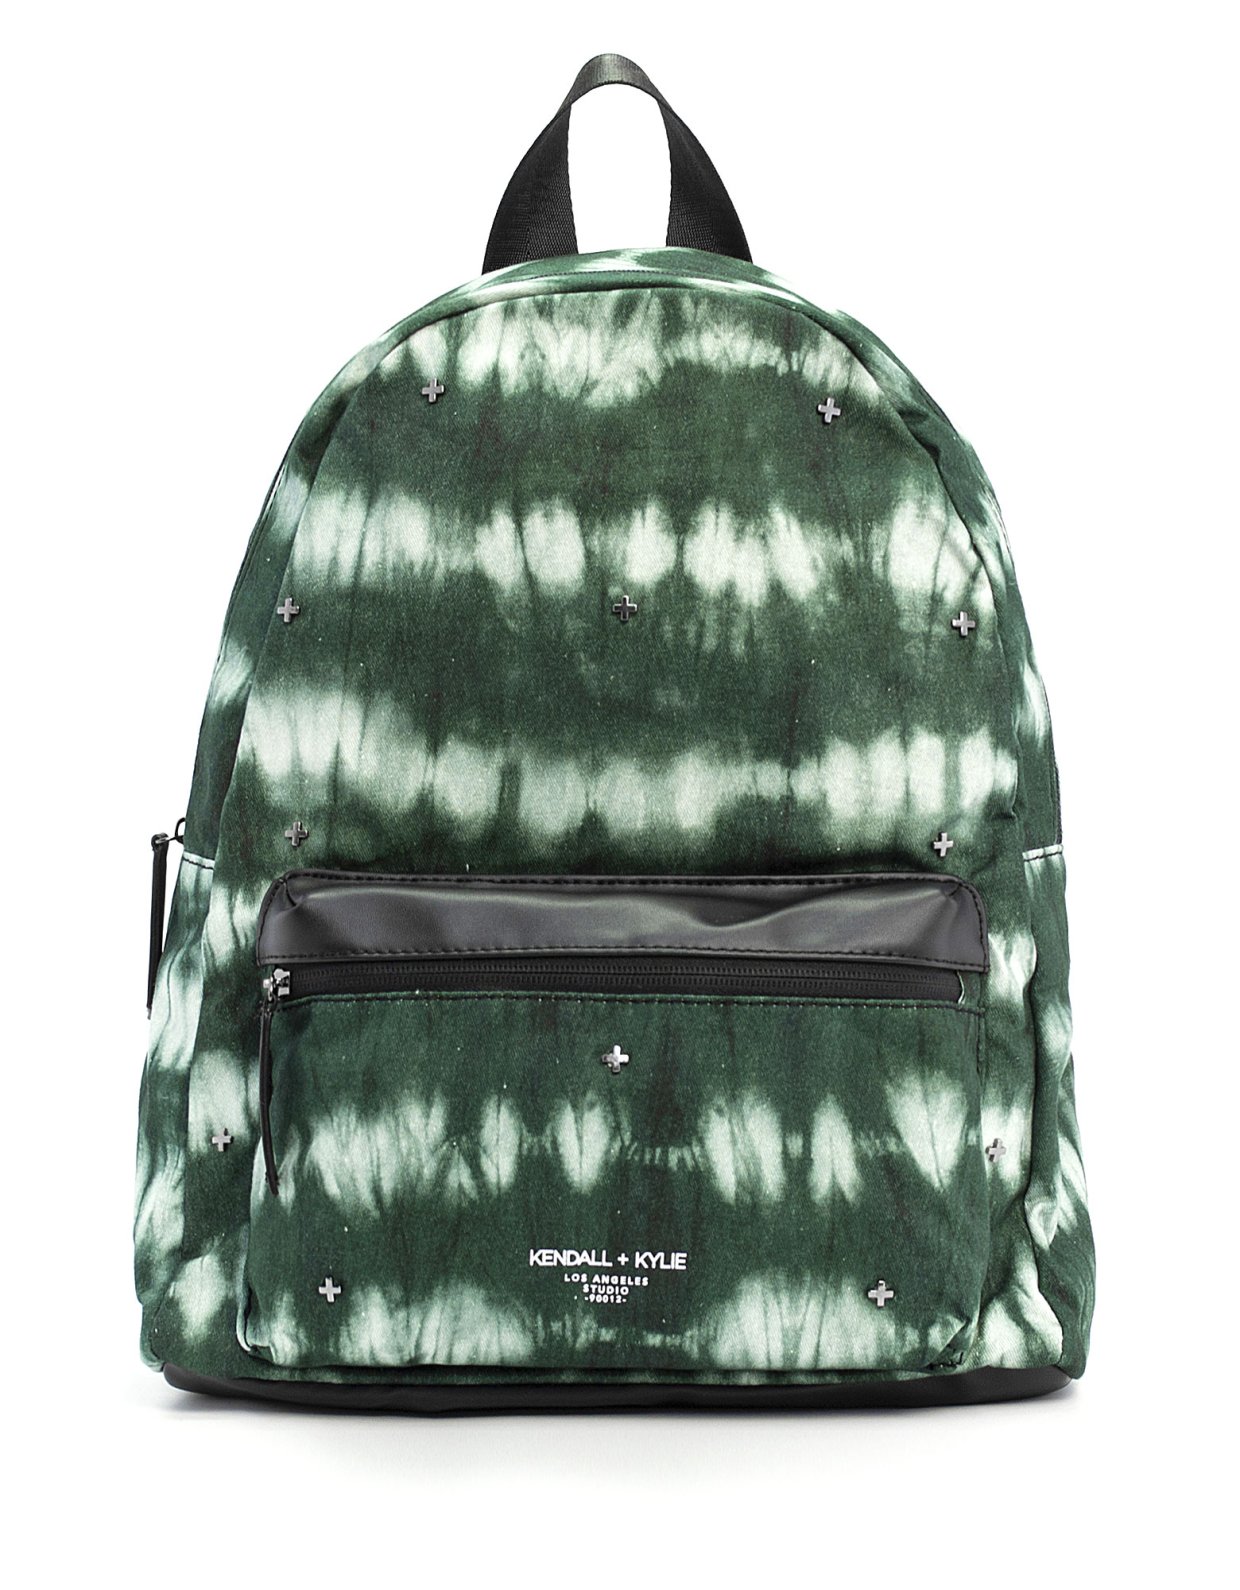 Kendall + Kylie Cora large backpack navy tie dye canvas